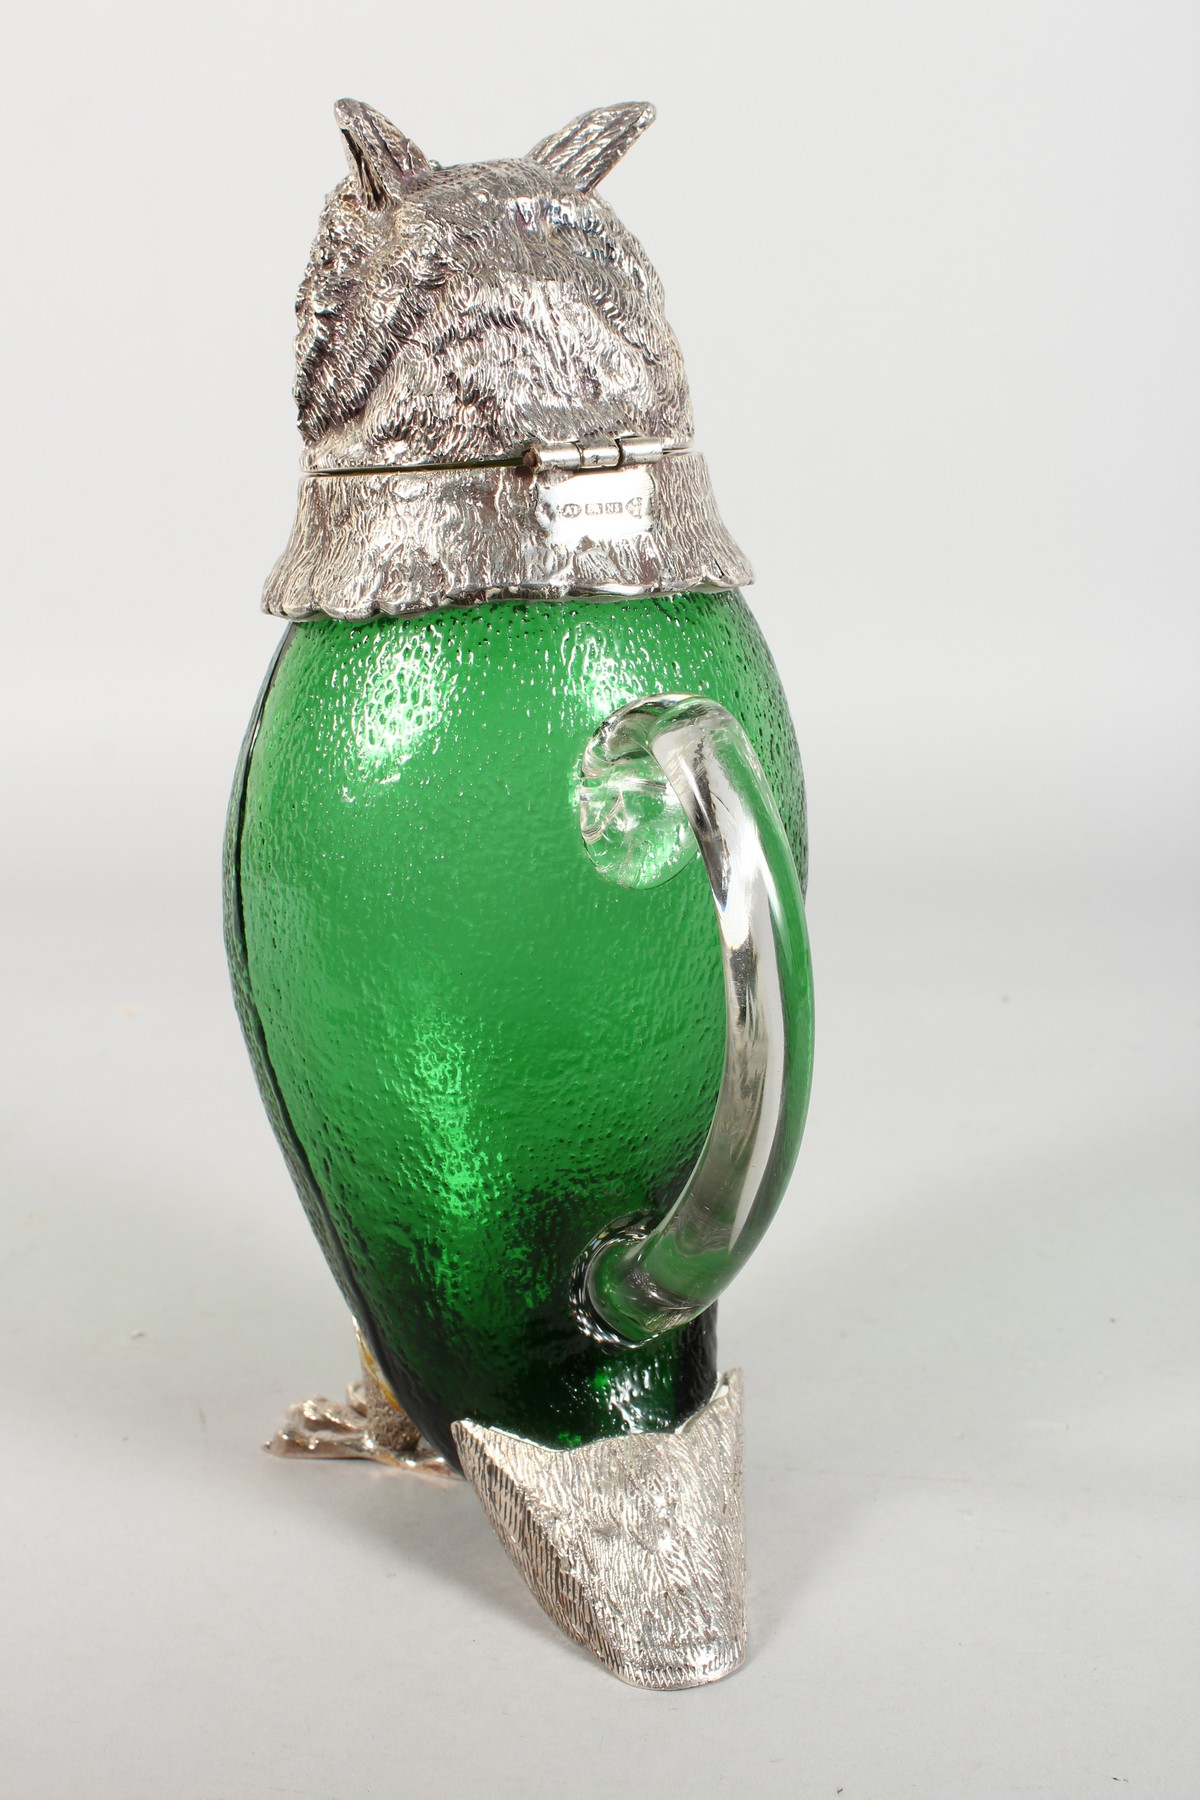 A SUPERB LARGE OWL CLARET JUG with plated head, glass eyes and plated claw feet. 11.5ins high. - Image 2 of 3